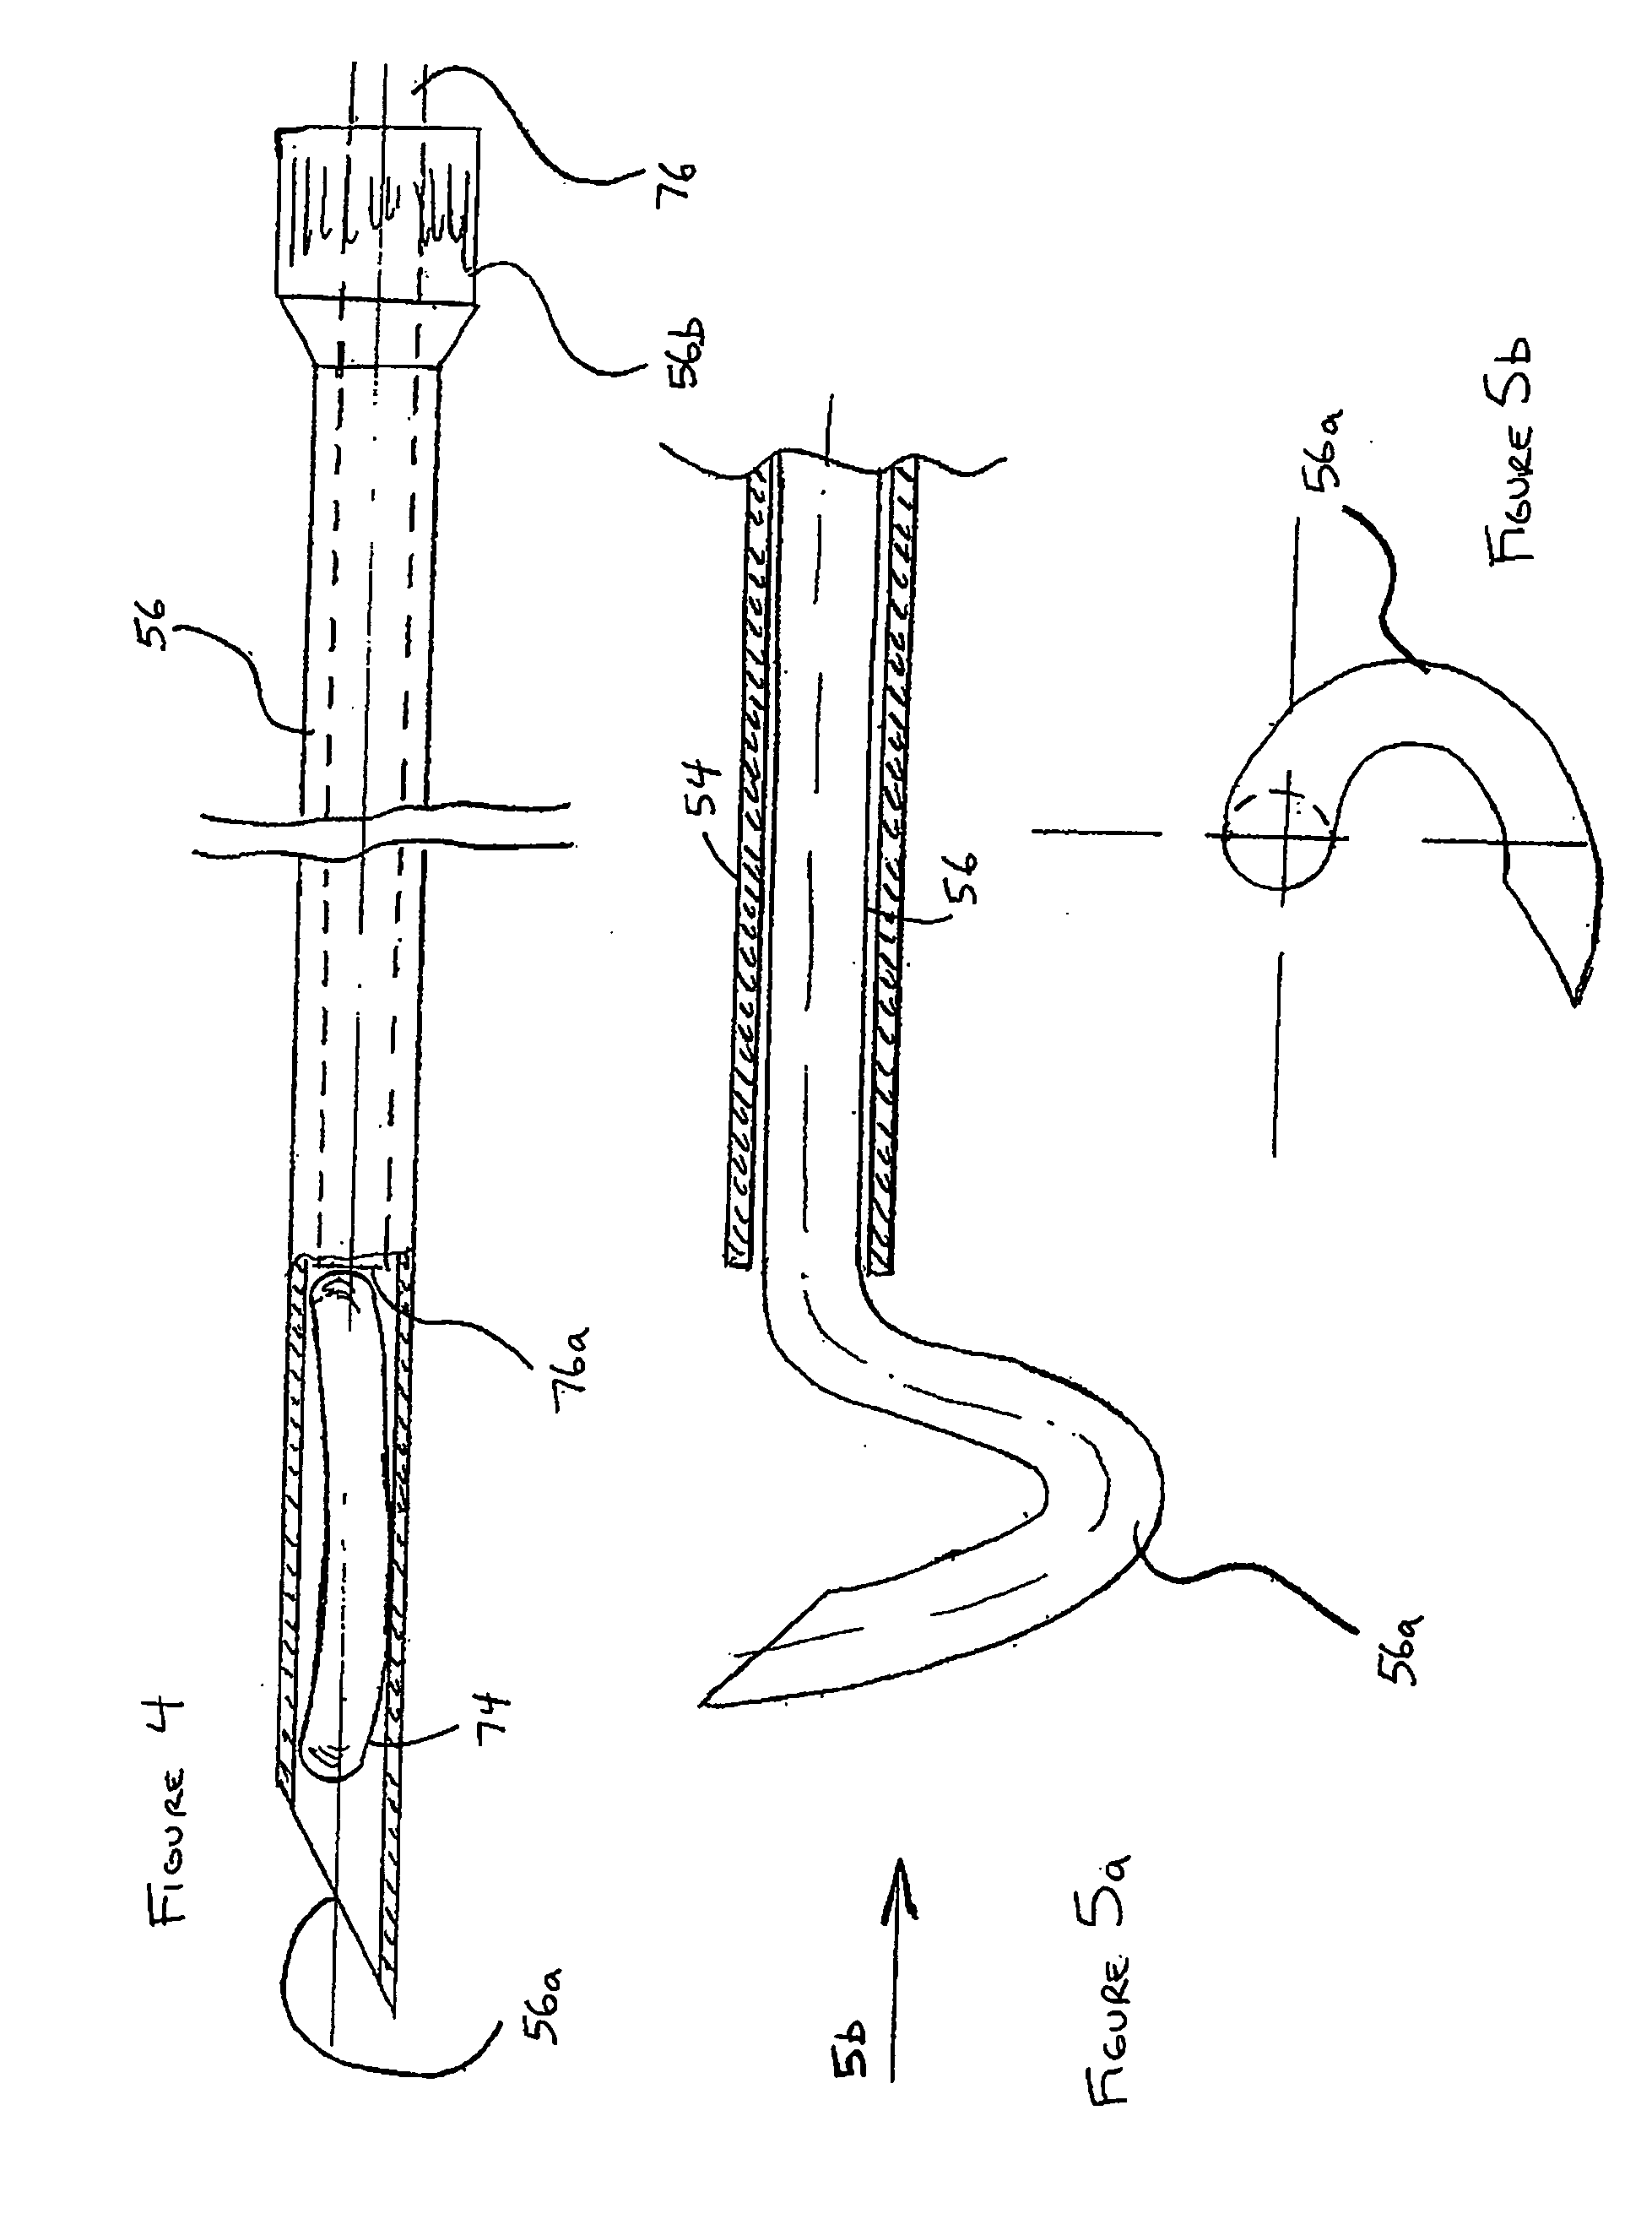 Catheter-based tissue remodeling devices and methods